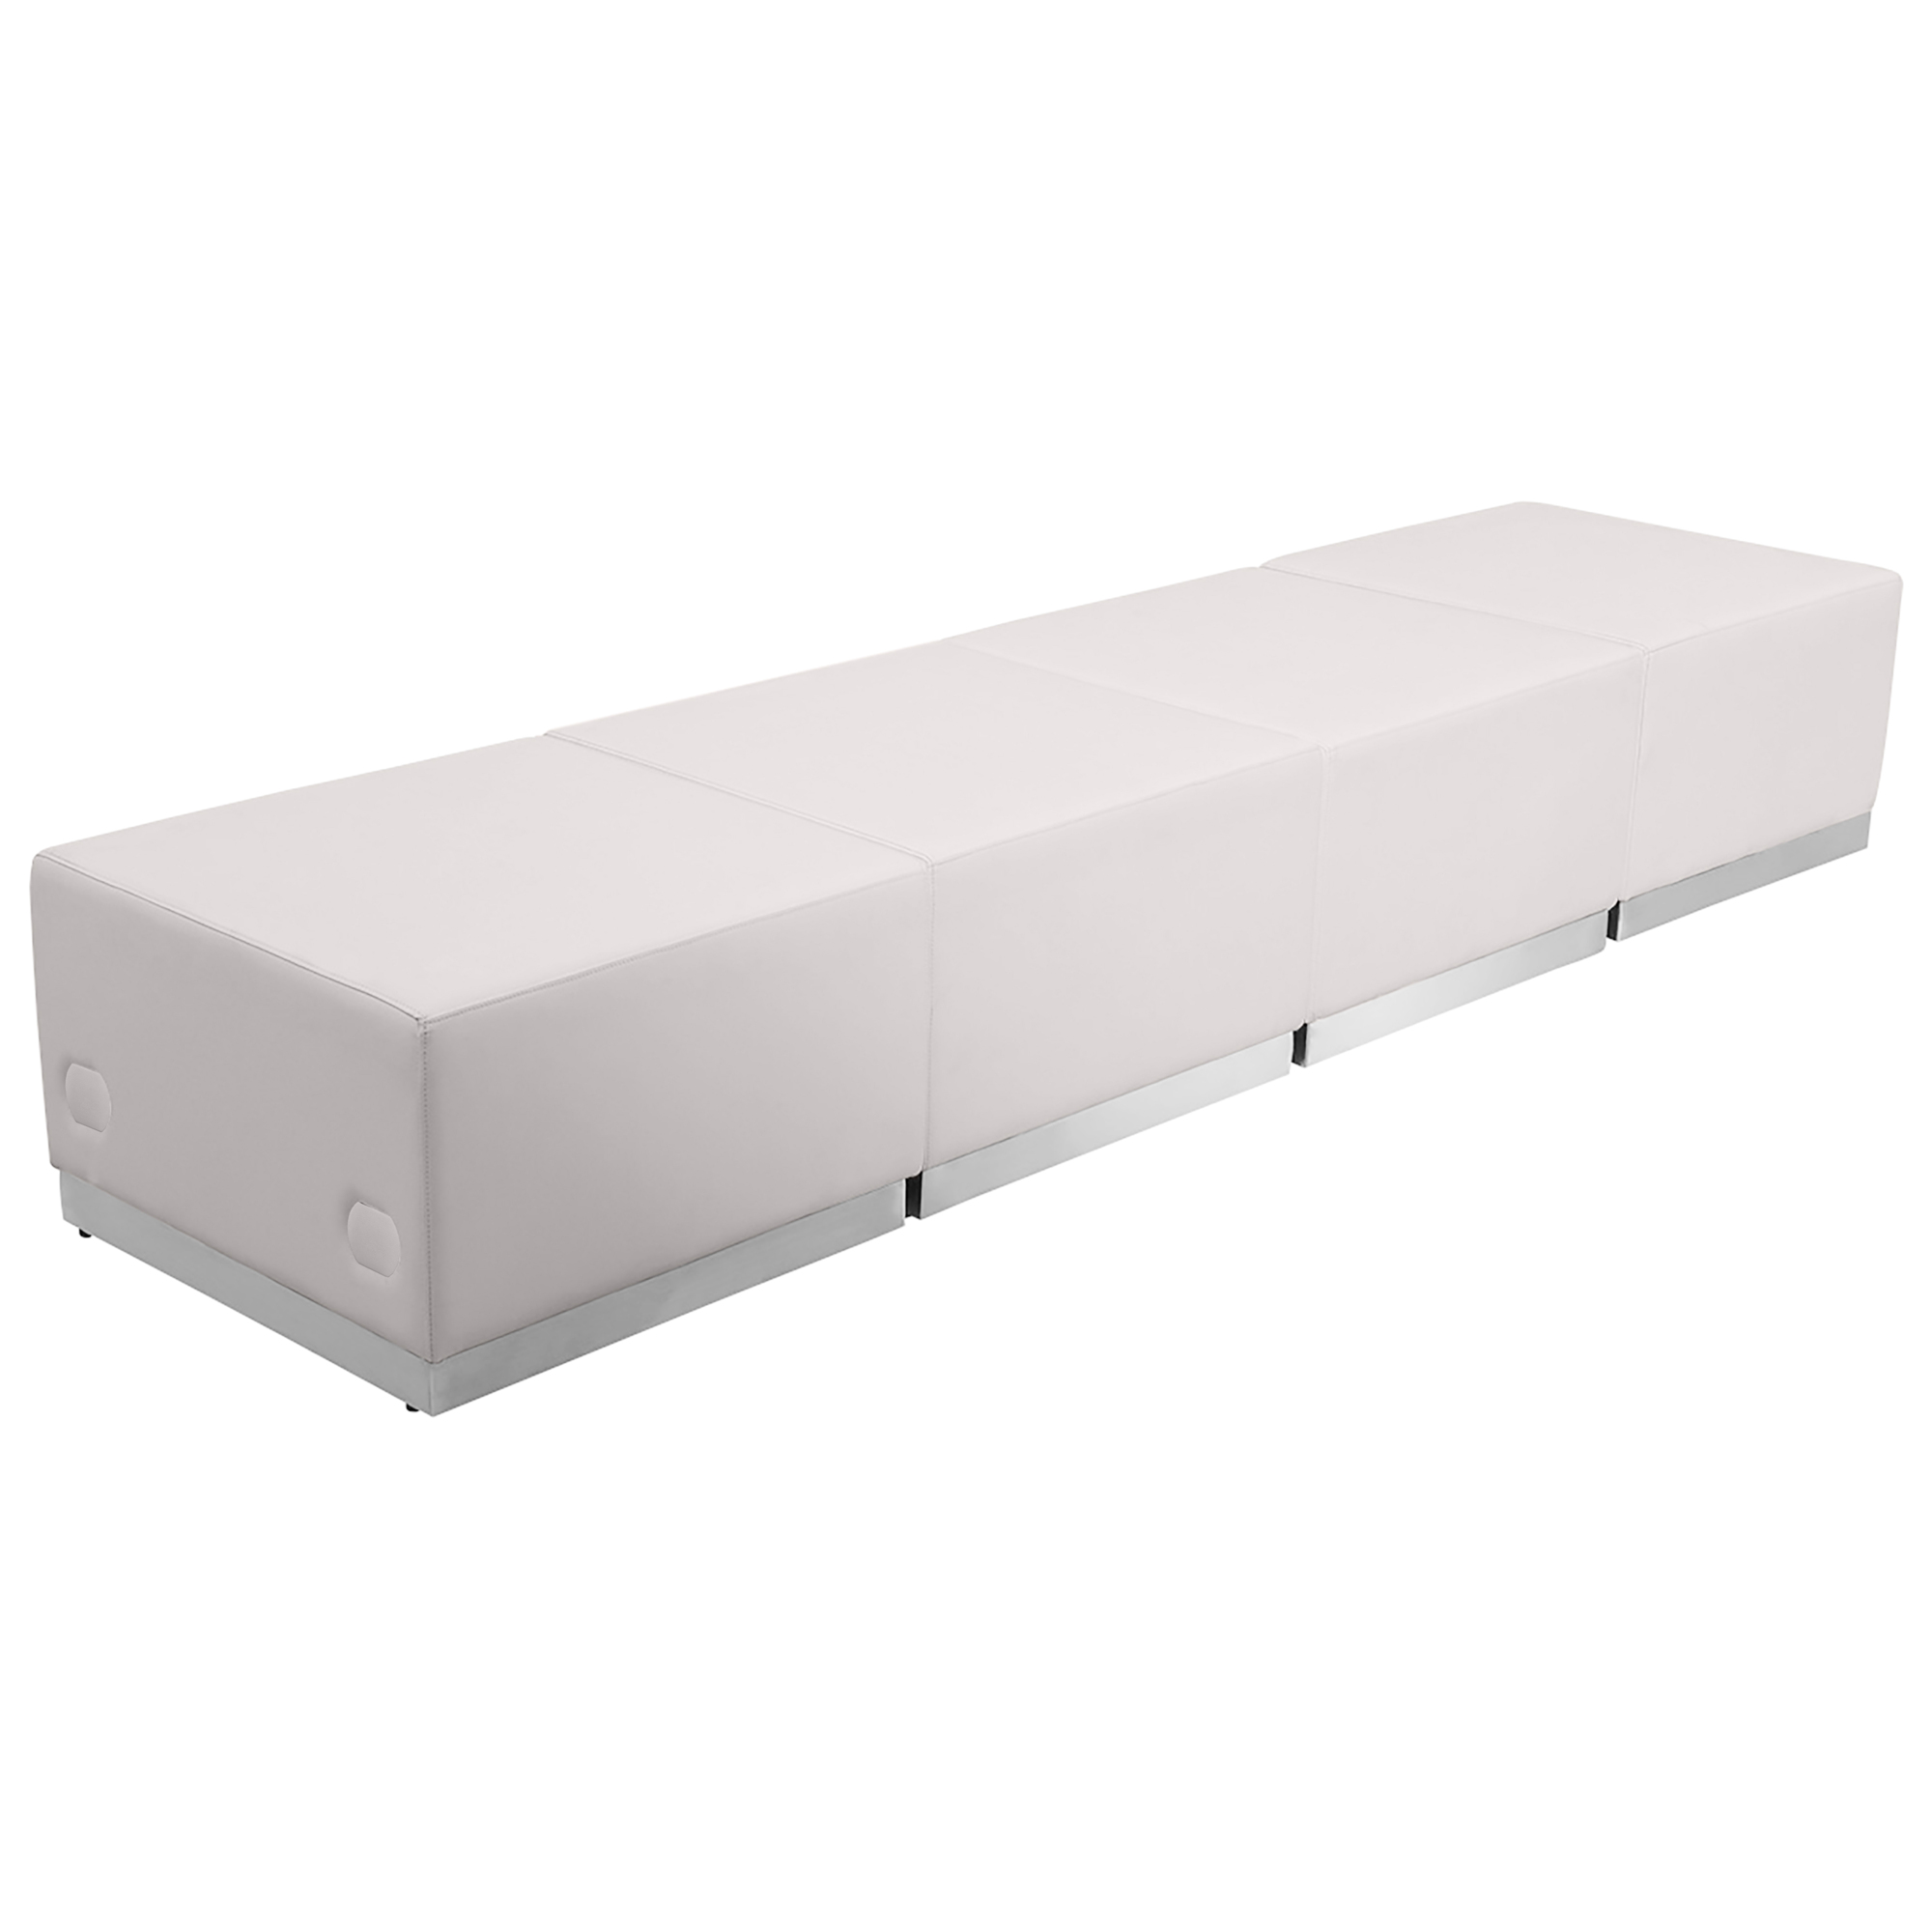 Flash Furniture, 4 PC White LeatherSoft Reception Configuration, Primary Color White, Included (qty.) 4, Model ZB803540SWH